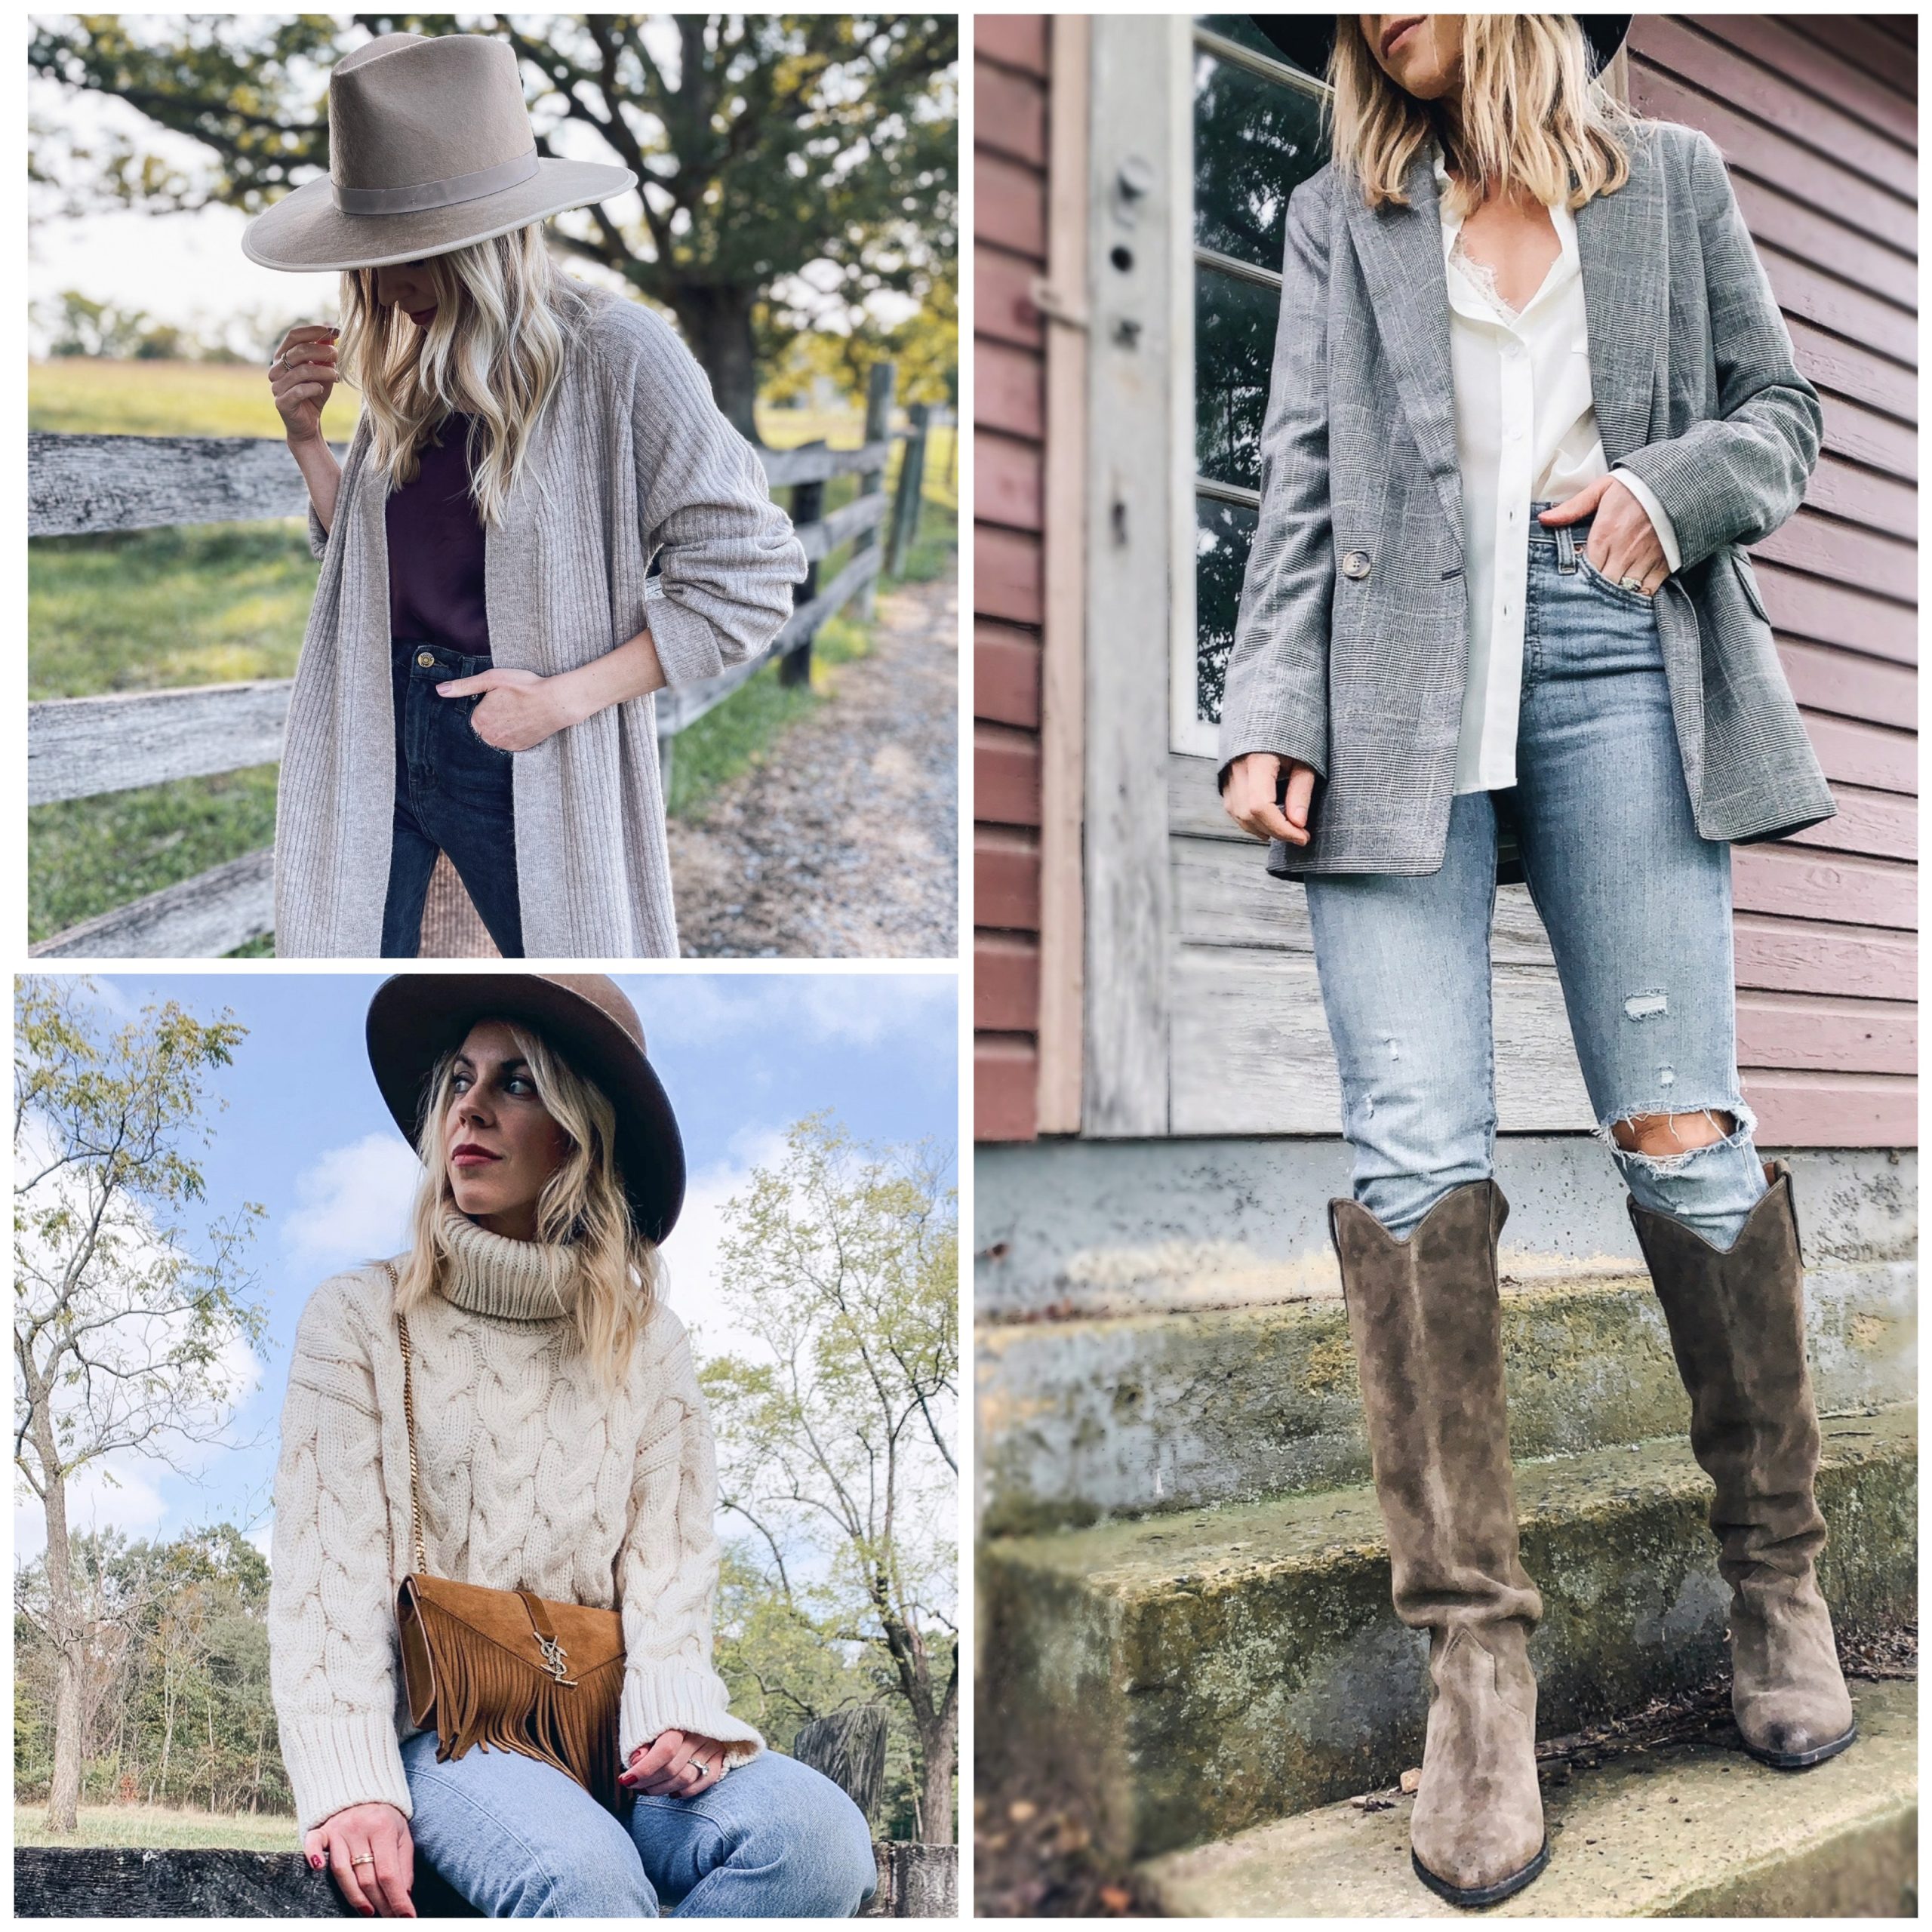 How To Wear Cowboy Boots In 2022: Style & Outfit Ideas